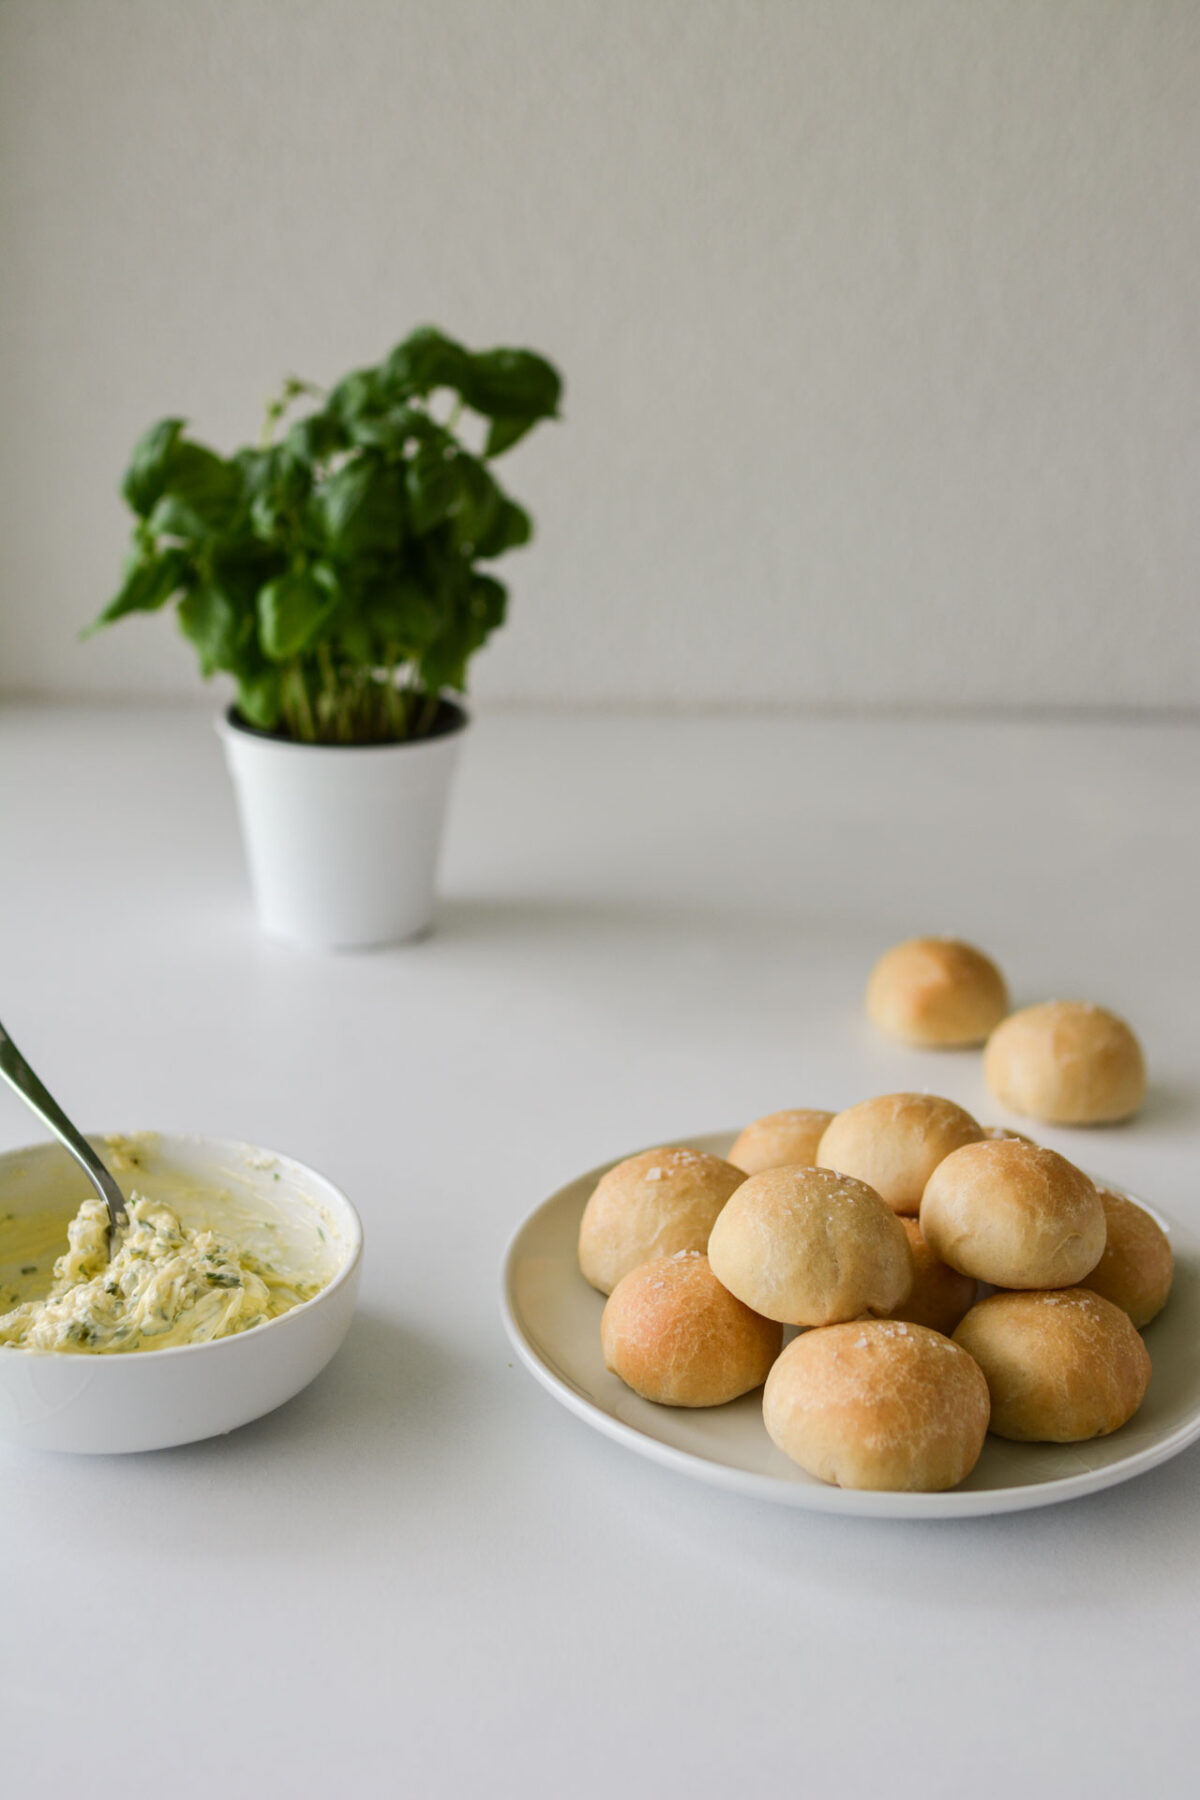 a plate with neatly arranged bunches of doughballs accompanied by a bowl of dressing placed nearby